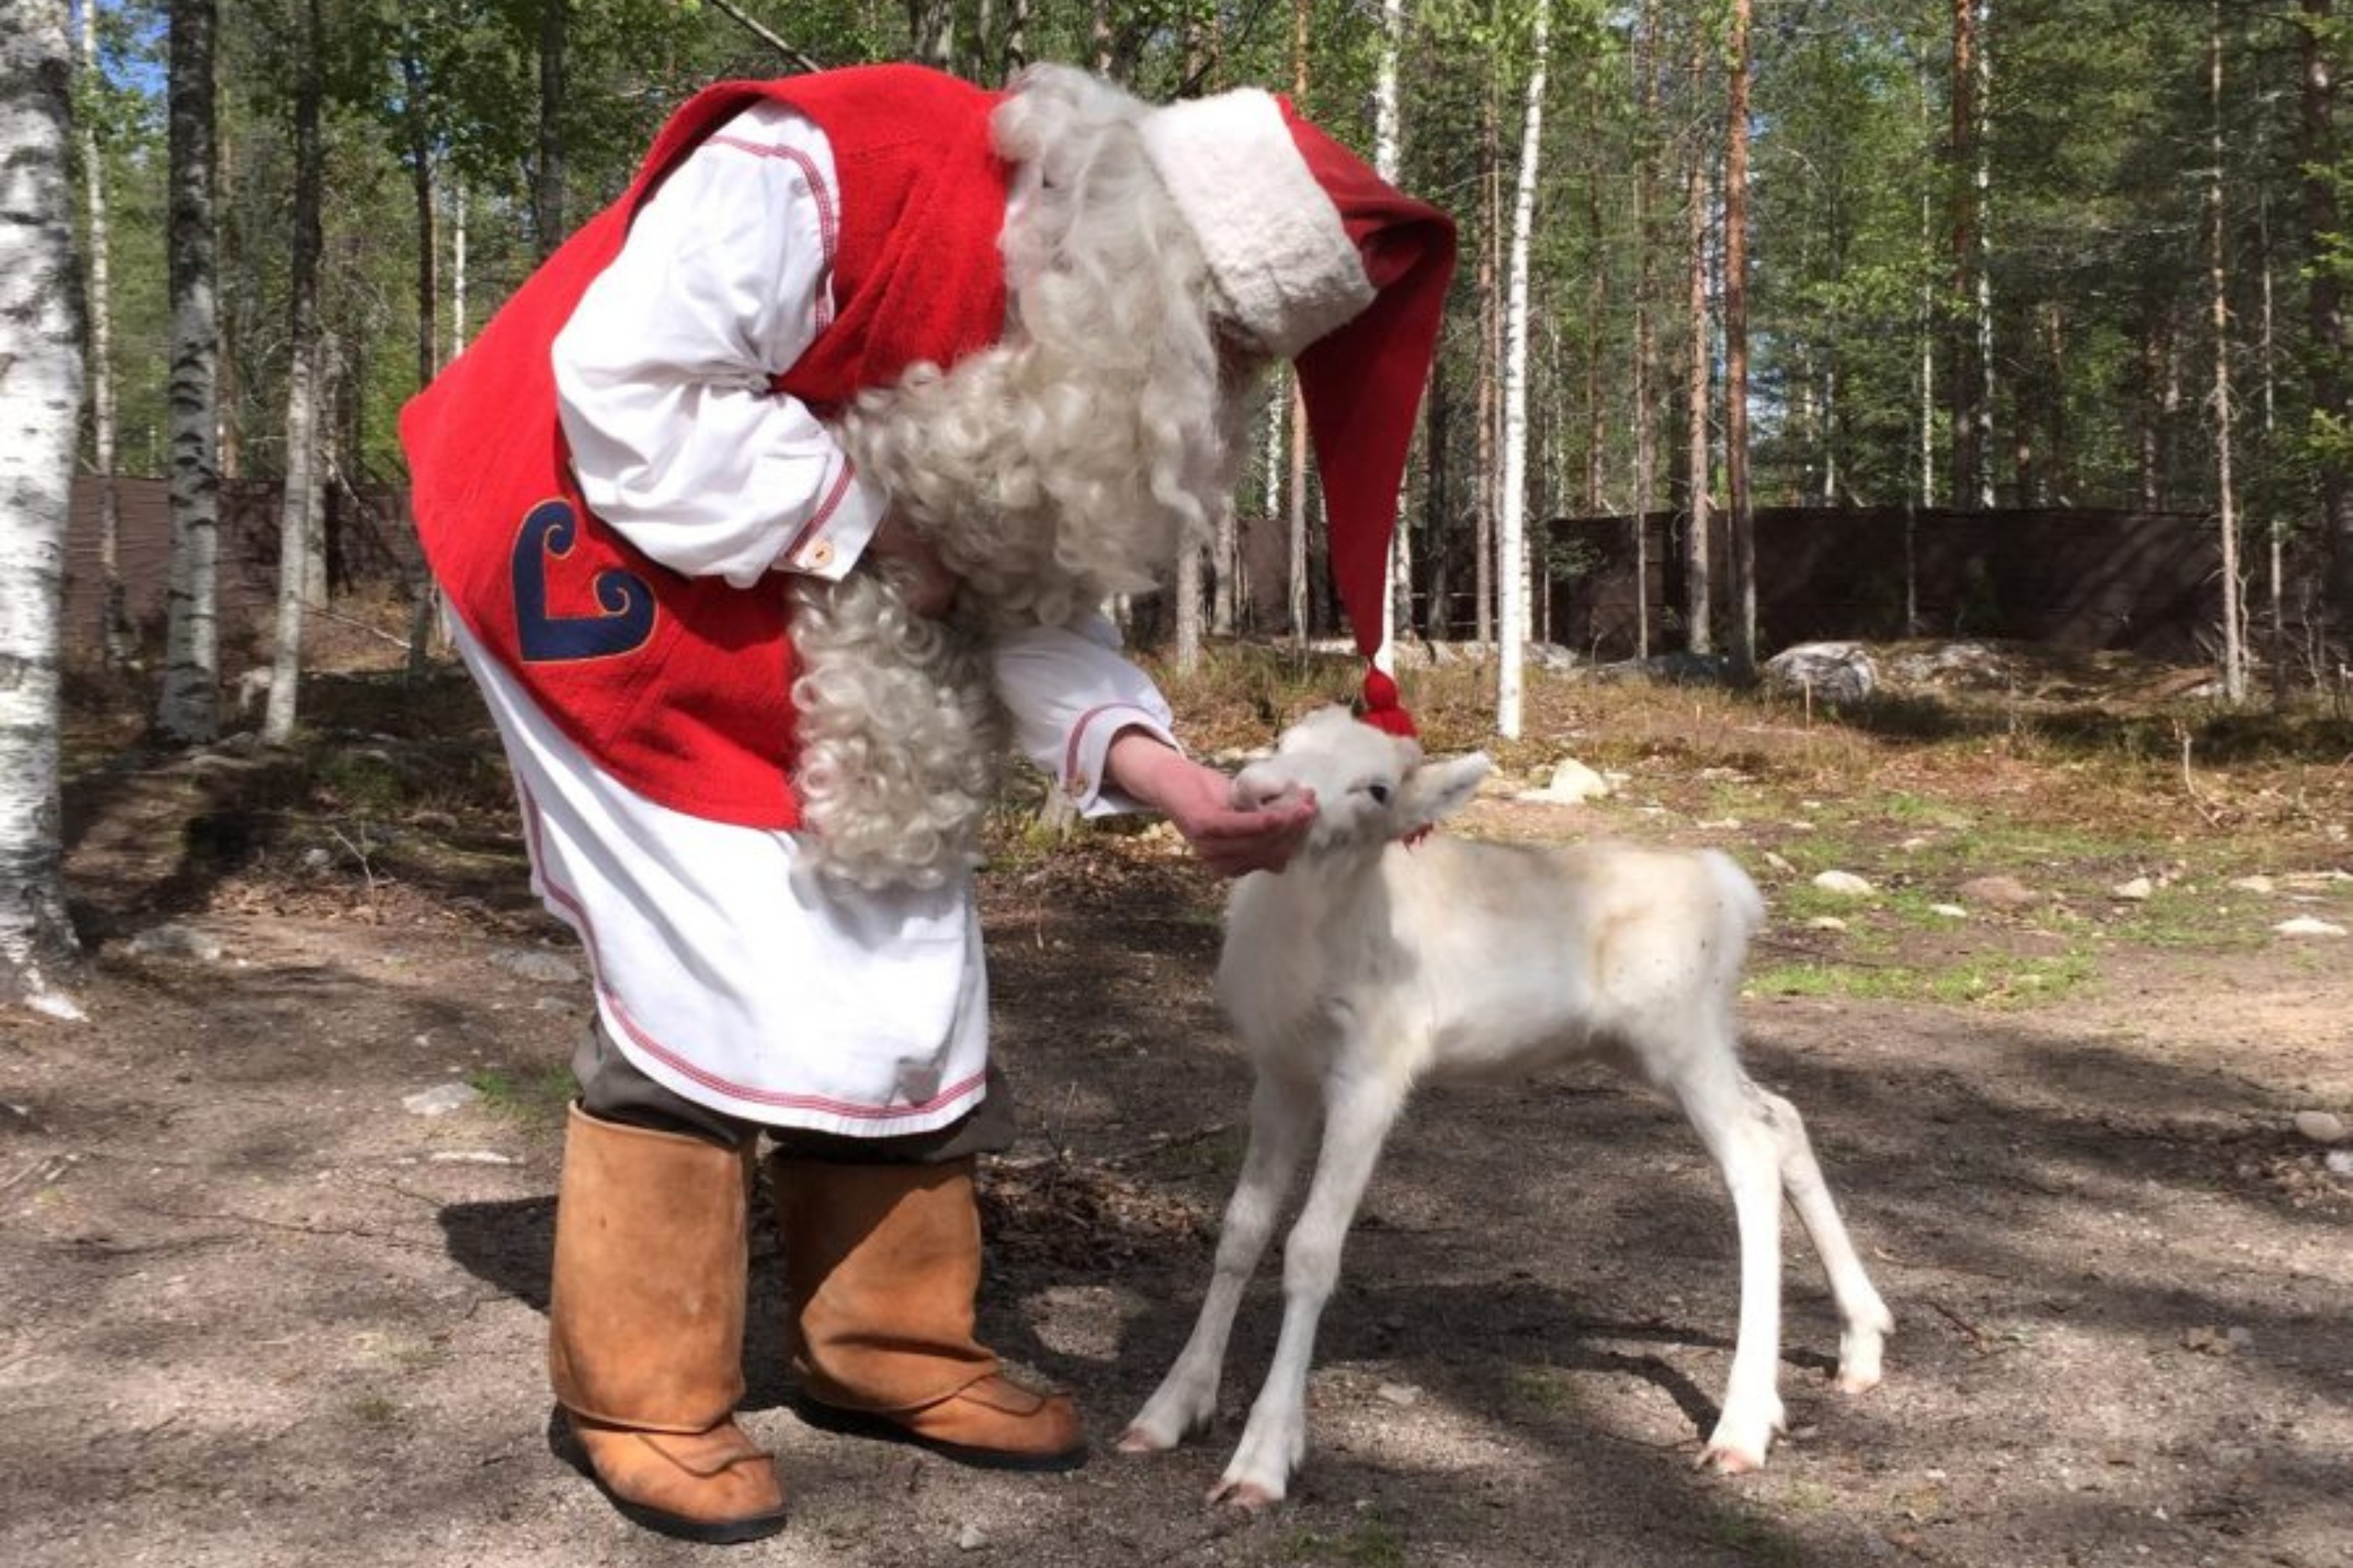  Santa Claus and reindeer calves all in one place - this is definitely the place your kids would love to visit, right?